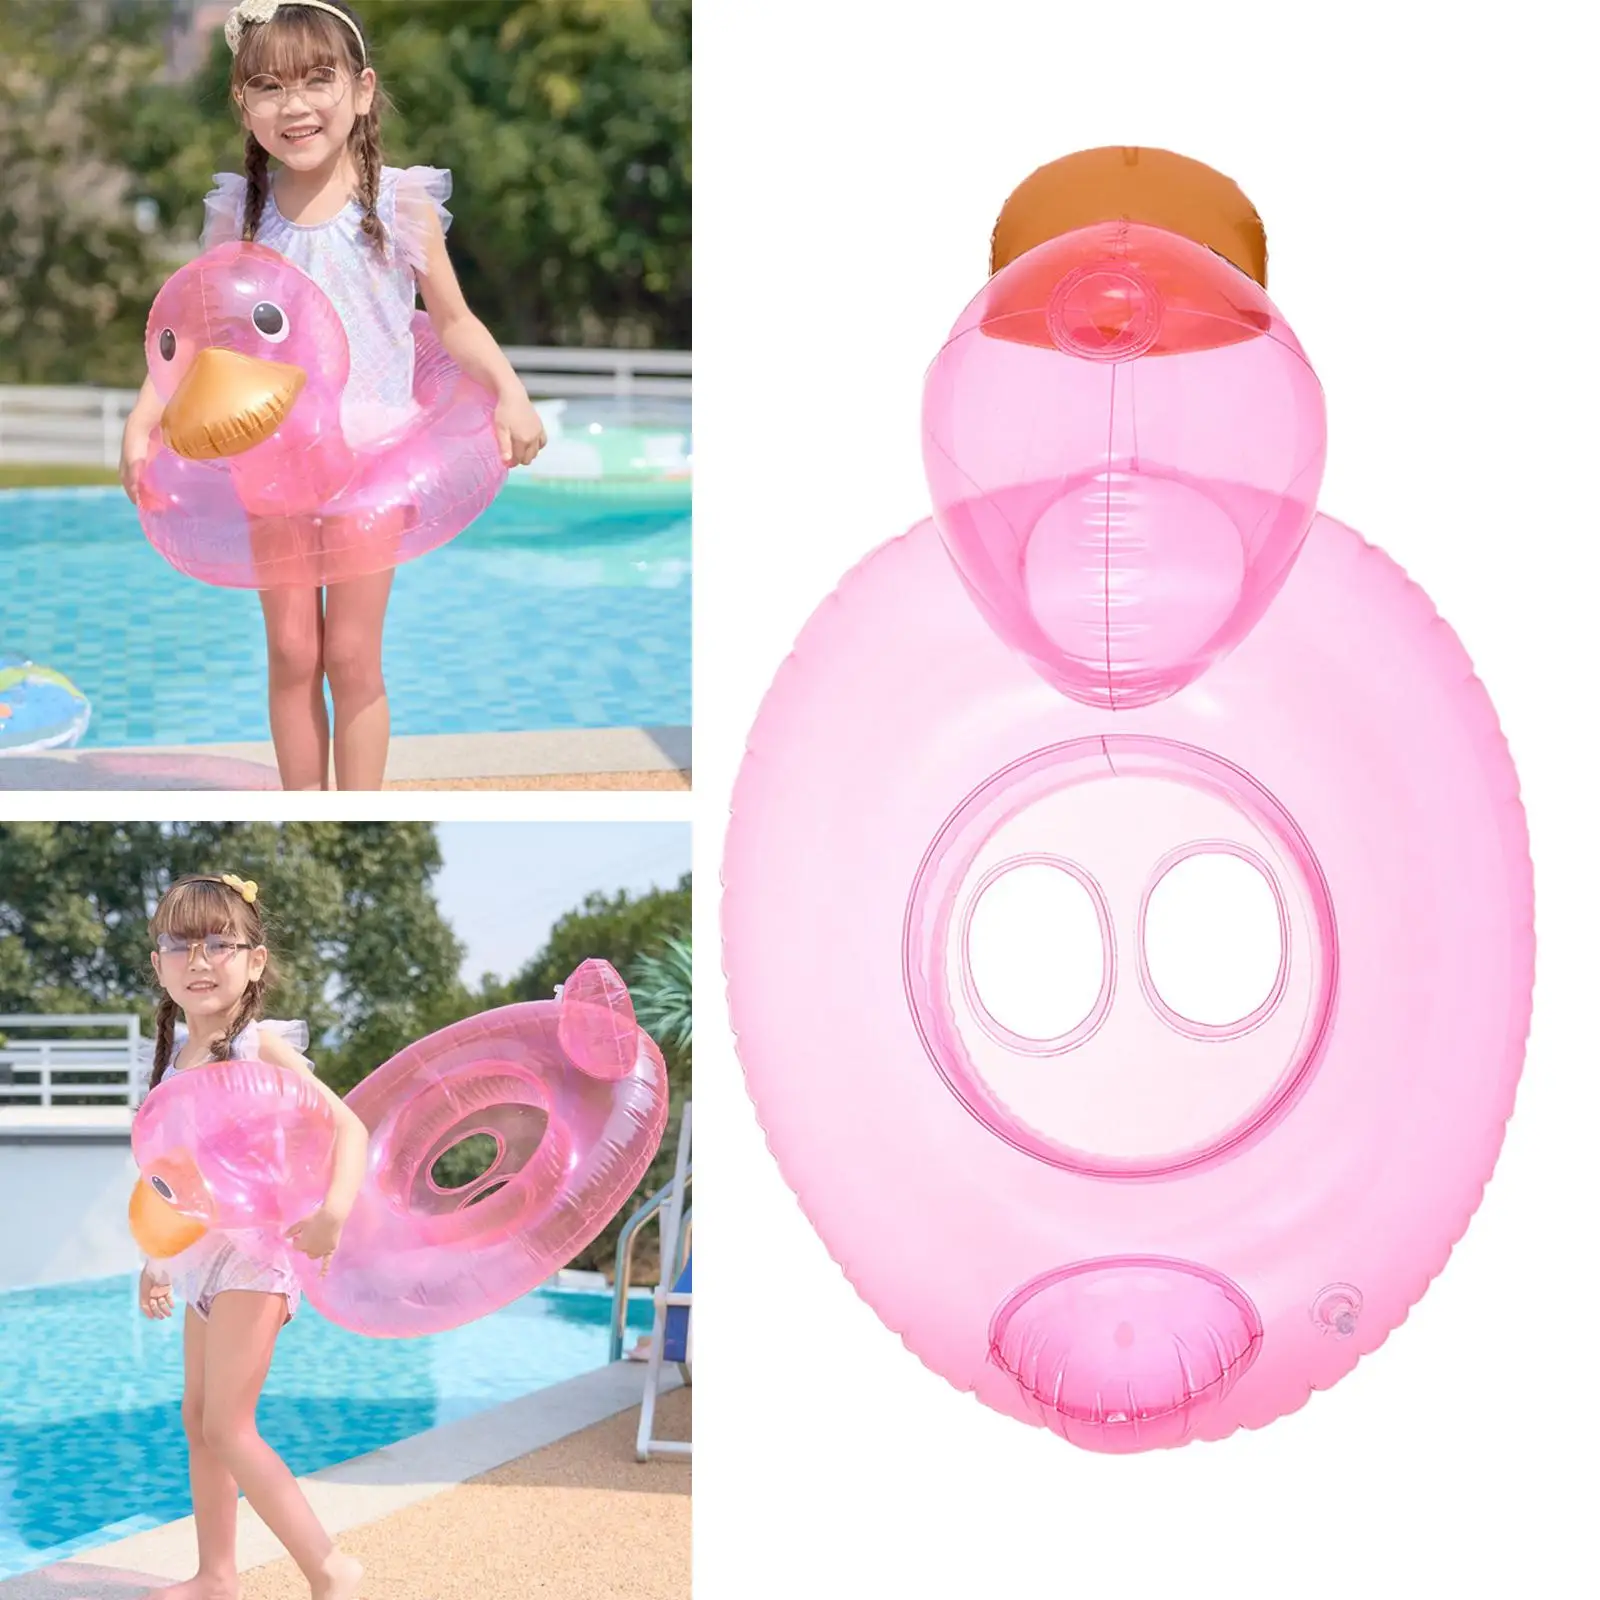 Inflatable Swimming Ring Floats Durable Toys Floating Lightweight Safety Cute